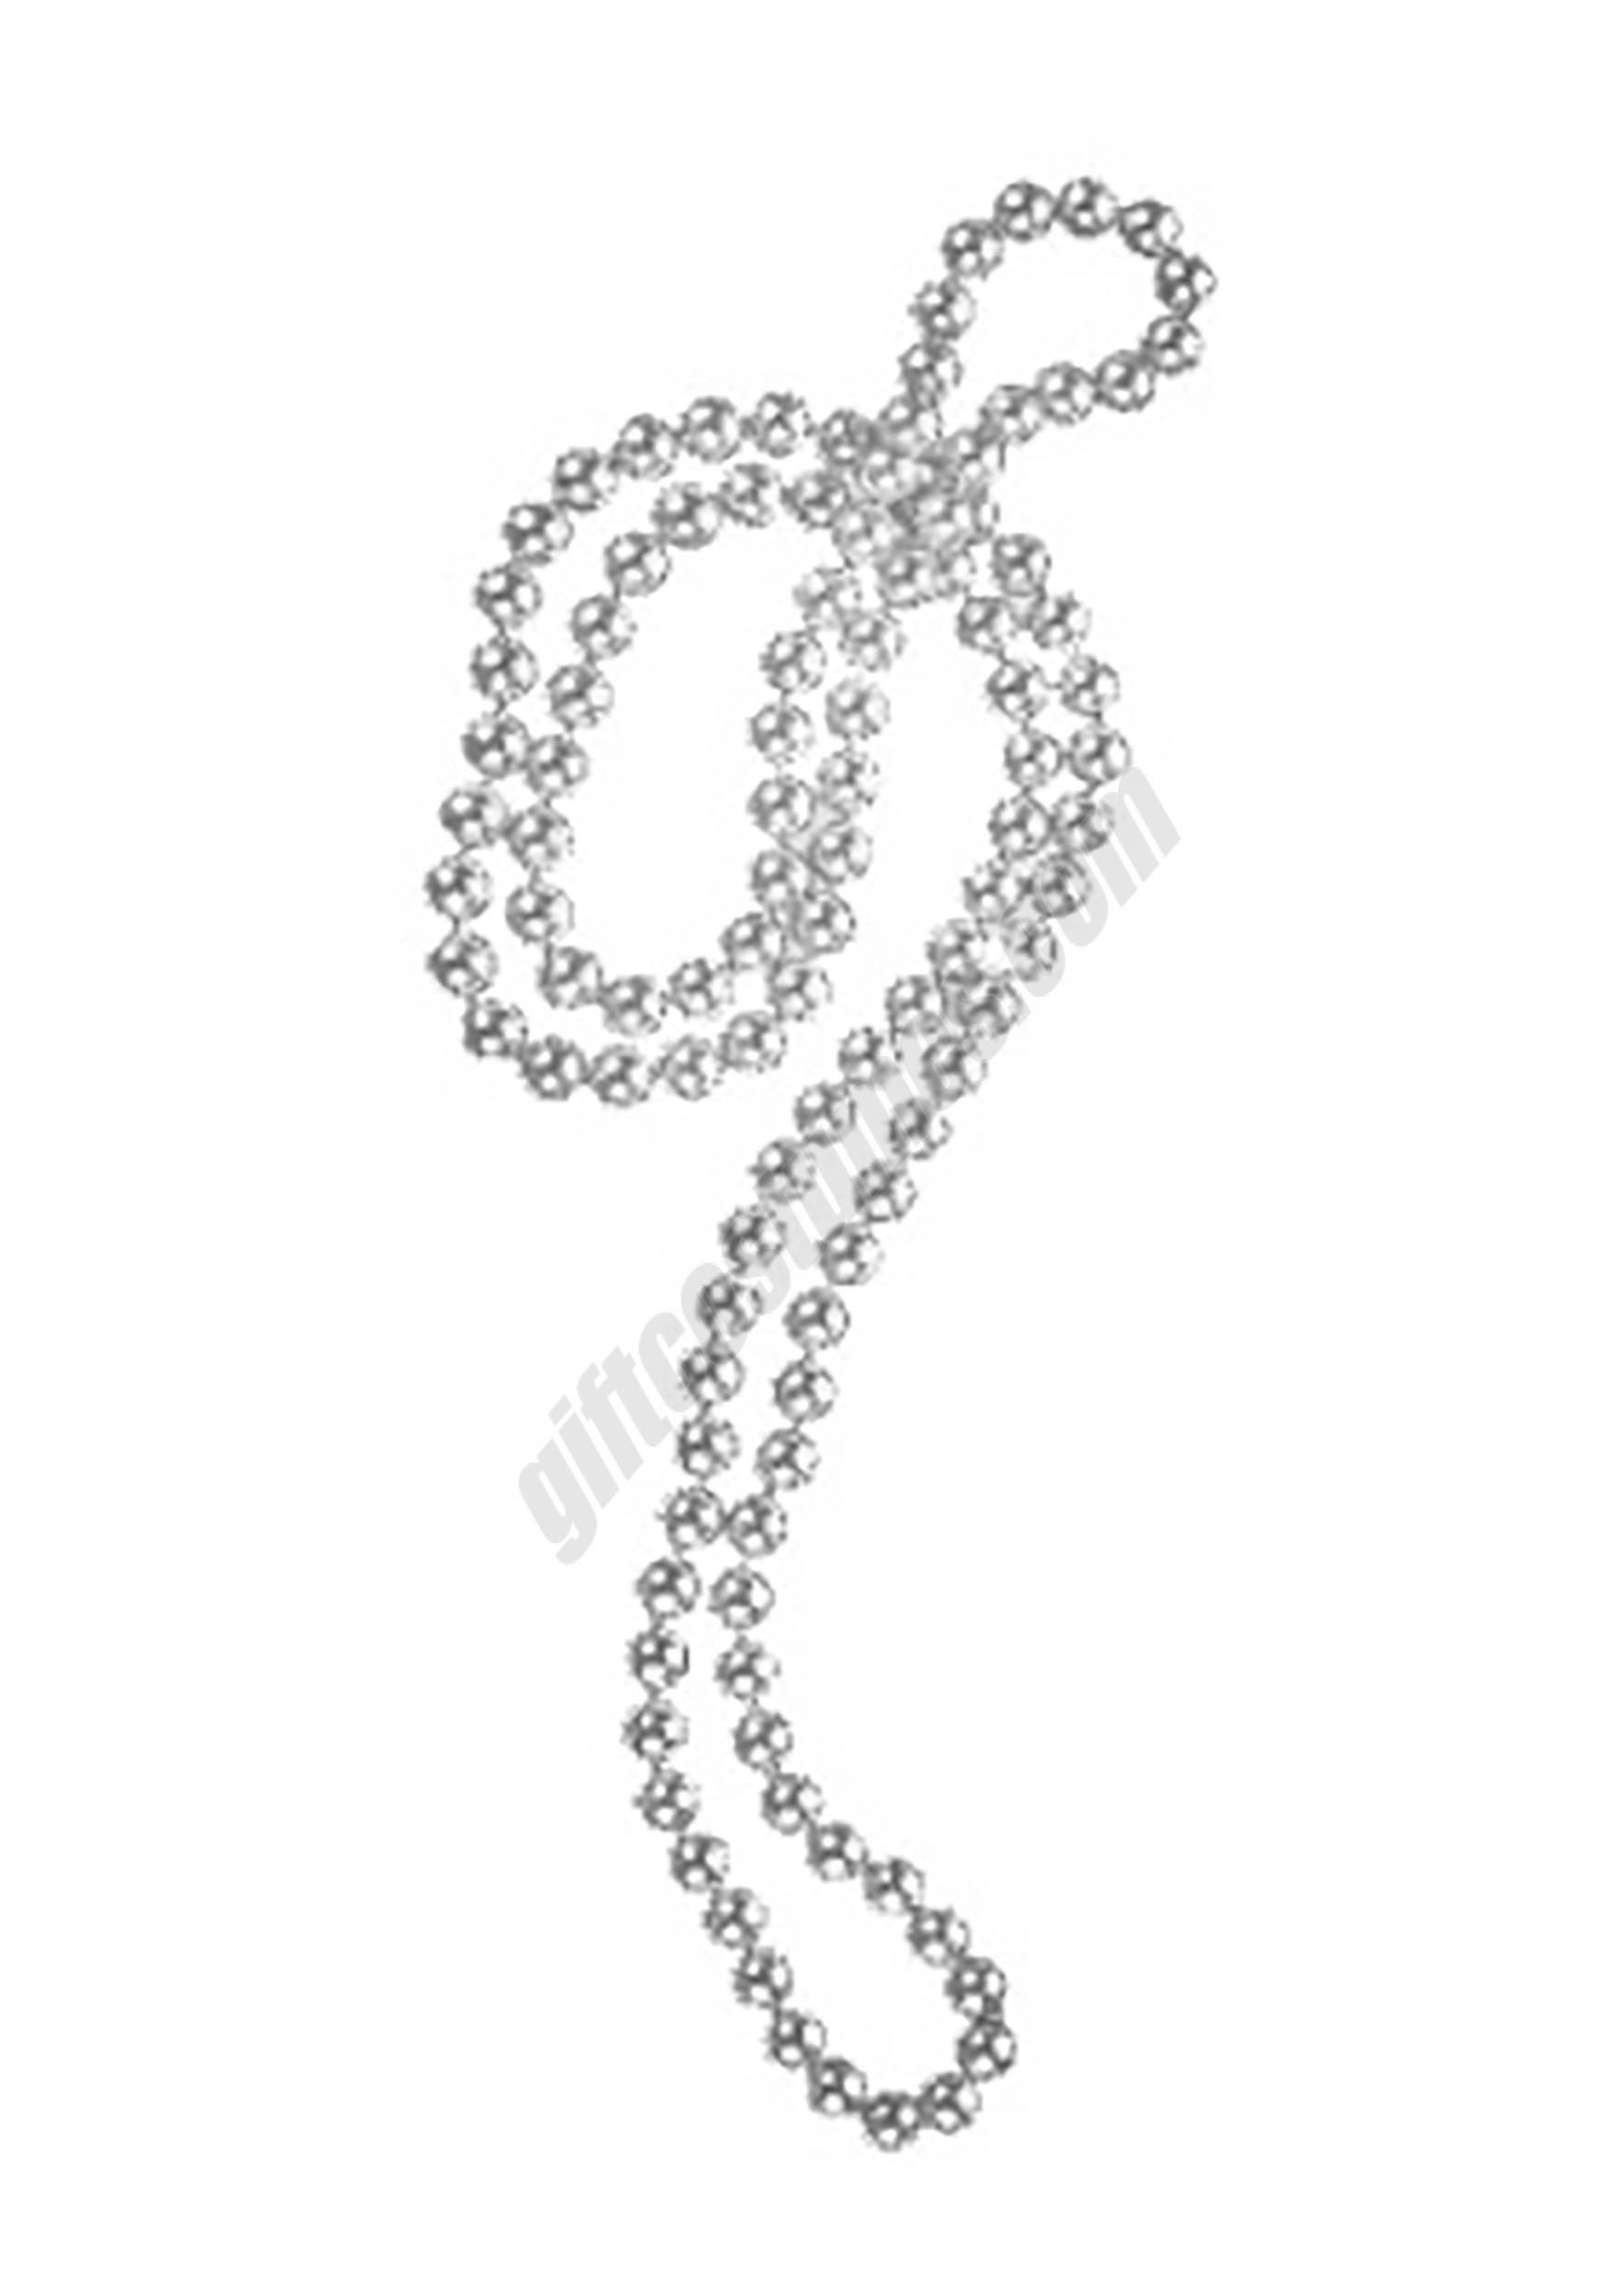 Beaded Silver Necklace Promotions - Beaded Silver Necklace Promotions